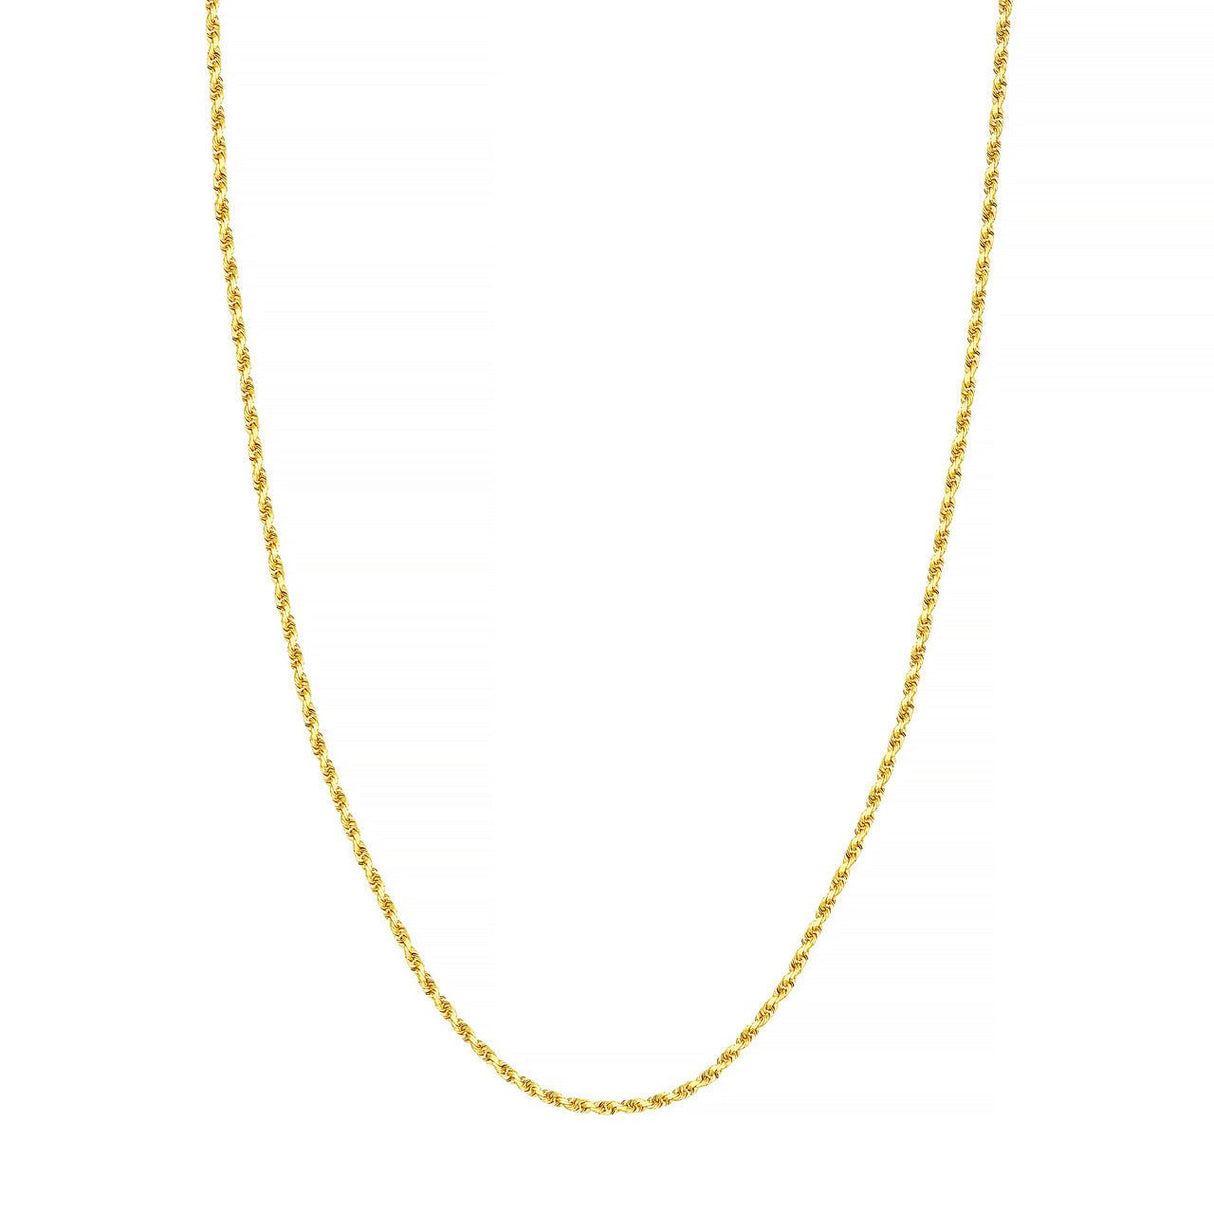 14K Gold Chain, 16", 2.15mm D/C Rope Chain with Lobster Lock, Gold Layered Chain, Gold Chain Necklace, - Diamond Origin